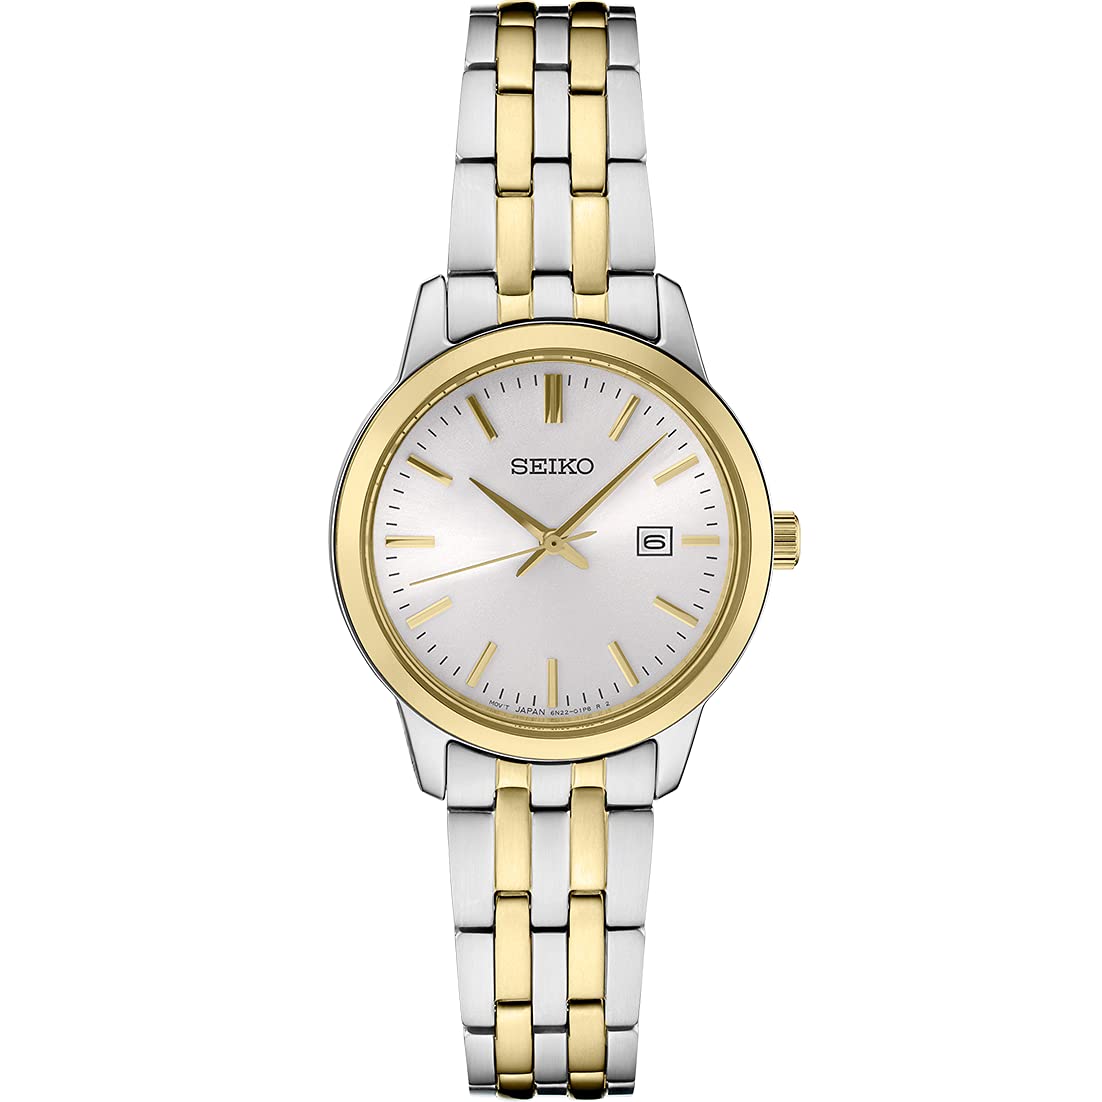 SEIKO SUR410 Watch for Women - Essentials Collection - Two-Tone Stainless Steel Case and Bracelet, White Dial